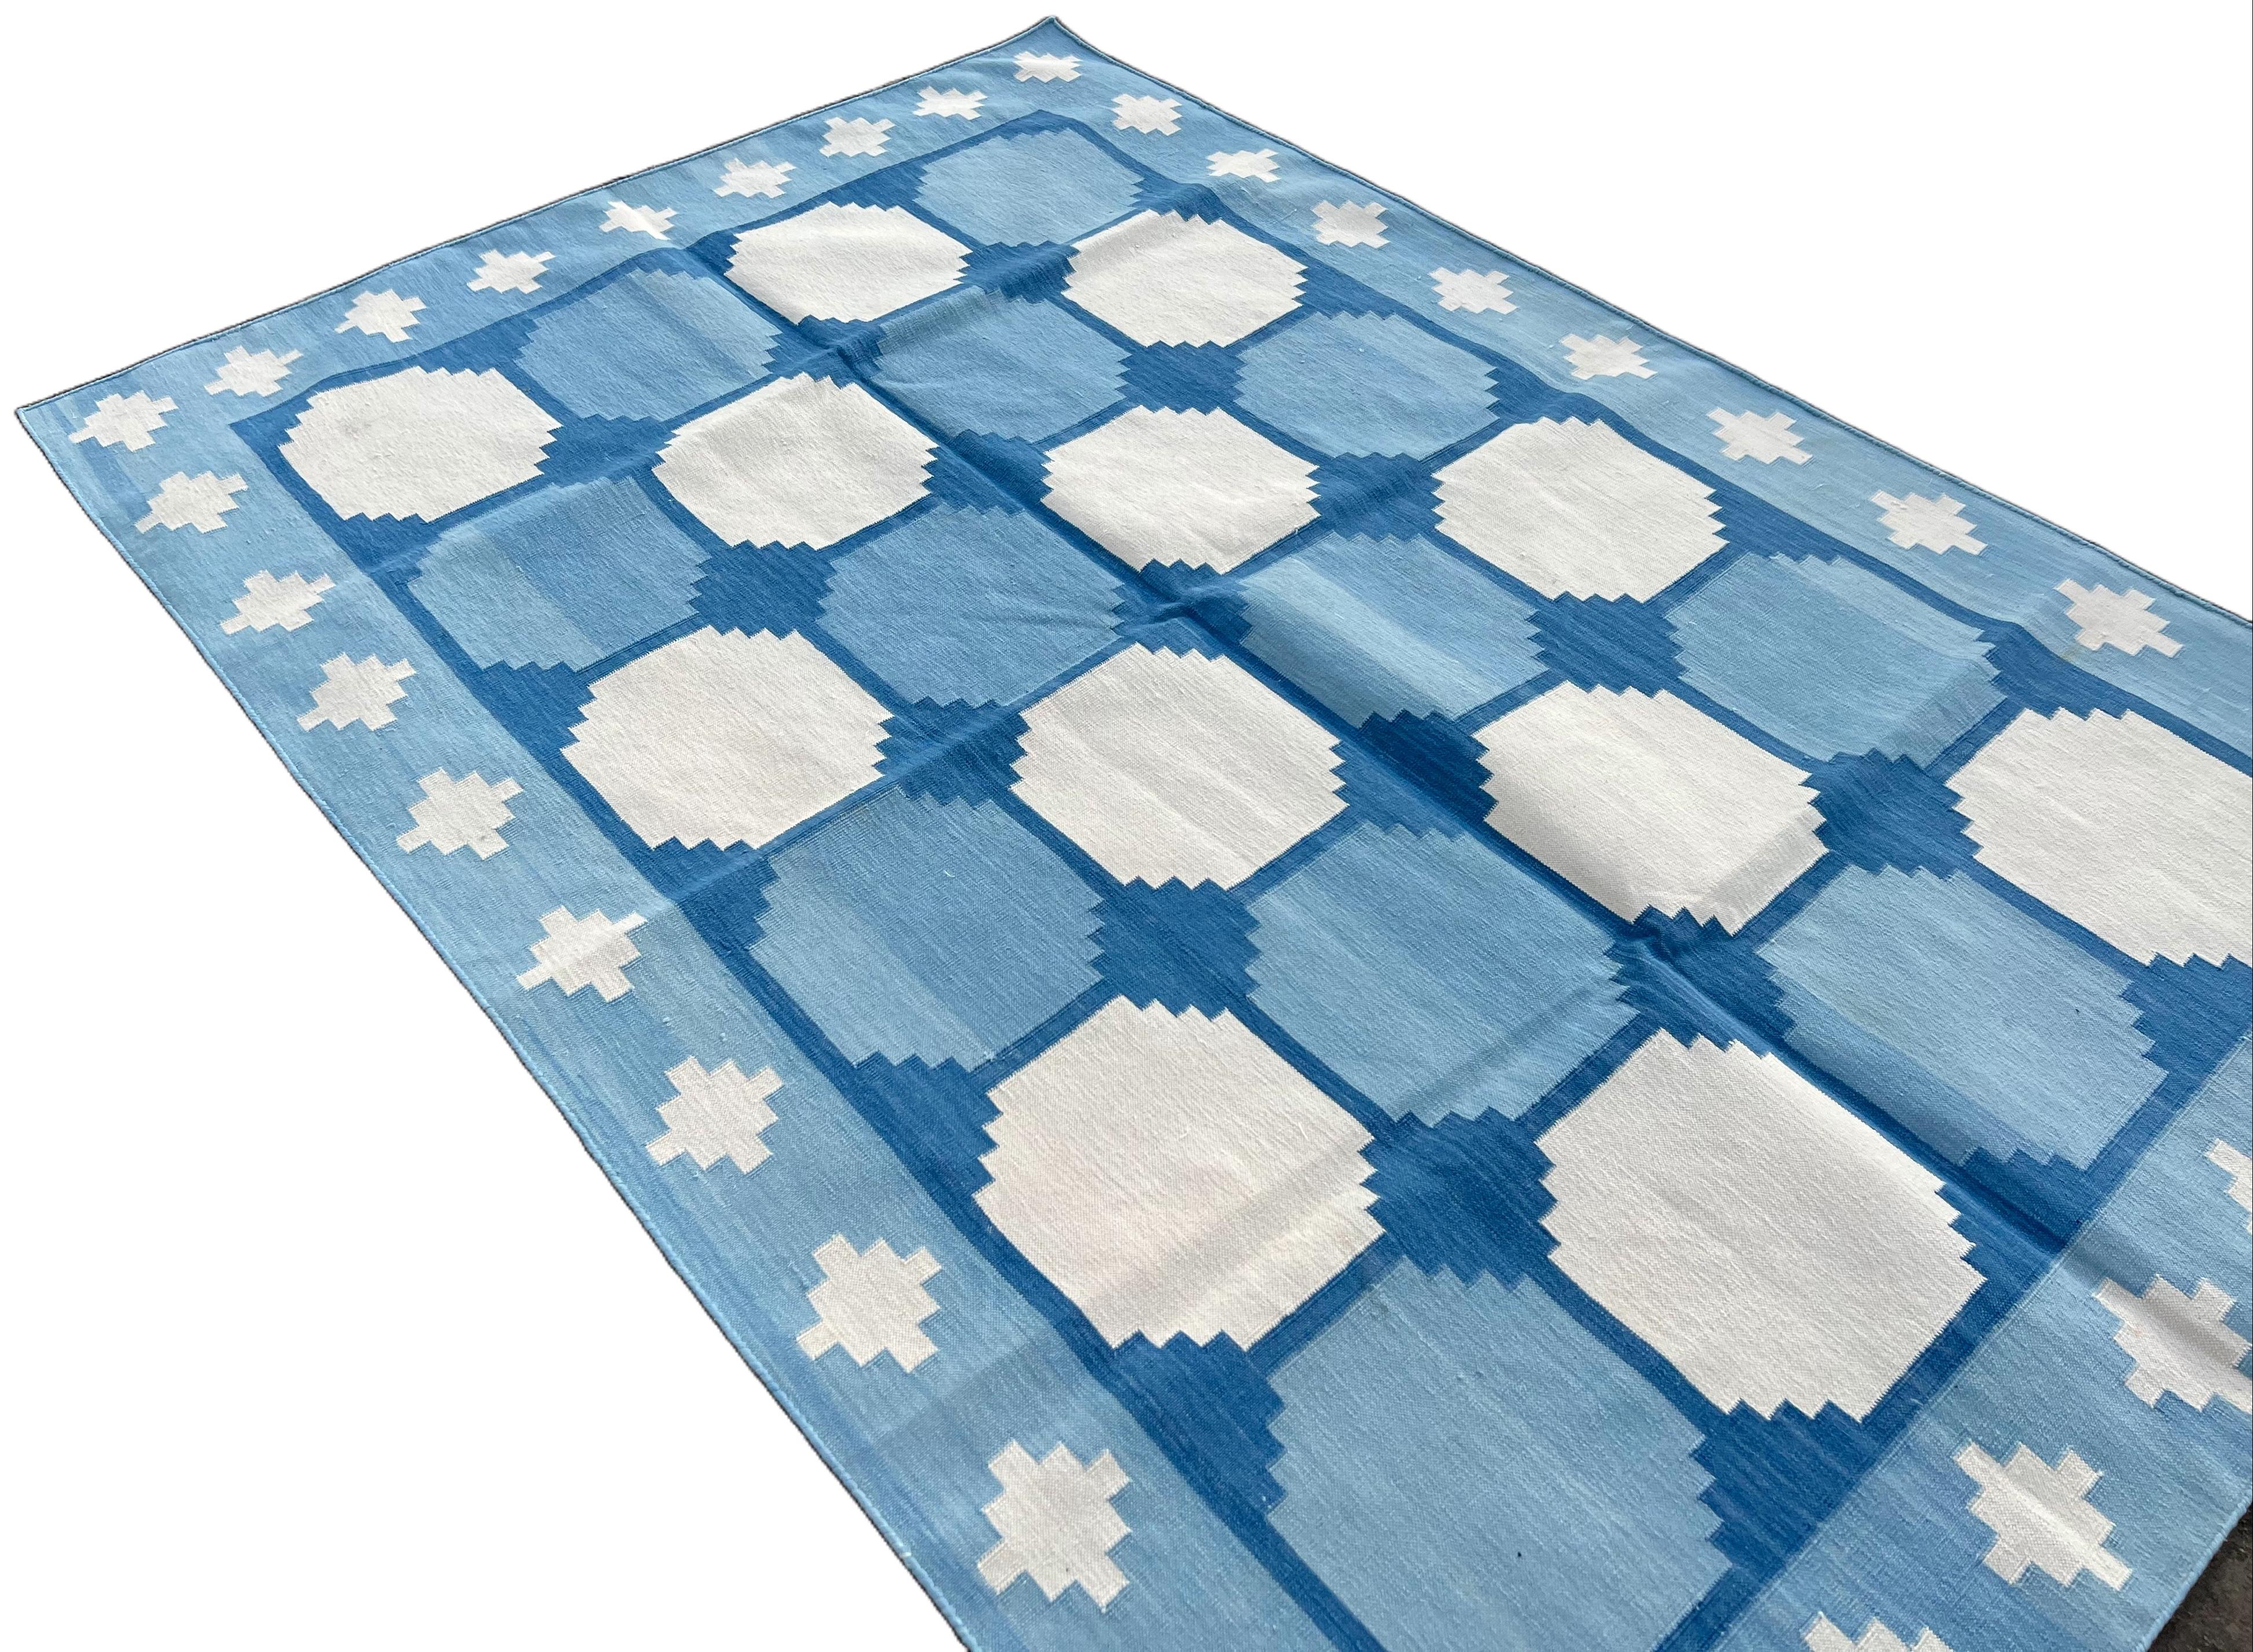 Hand-Woven Handmade Cotton Area Flat Weave Rug, 4x6 Blue And White Tile Indian Dhurrie Rug For Sale